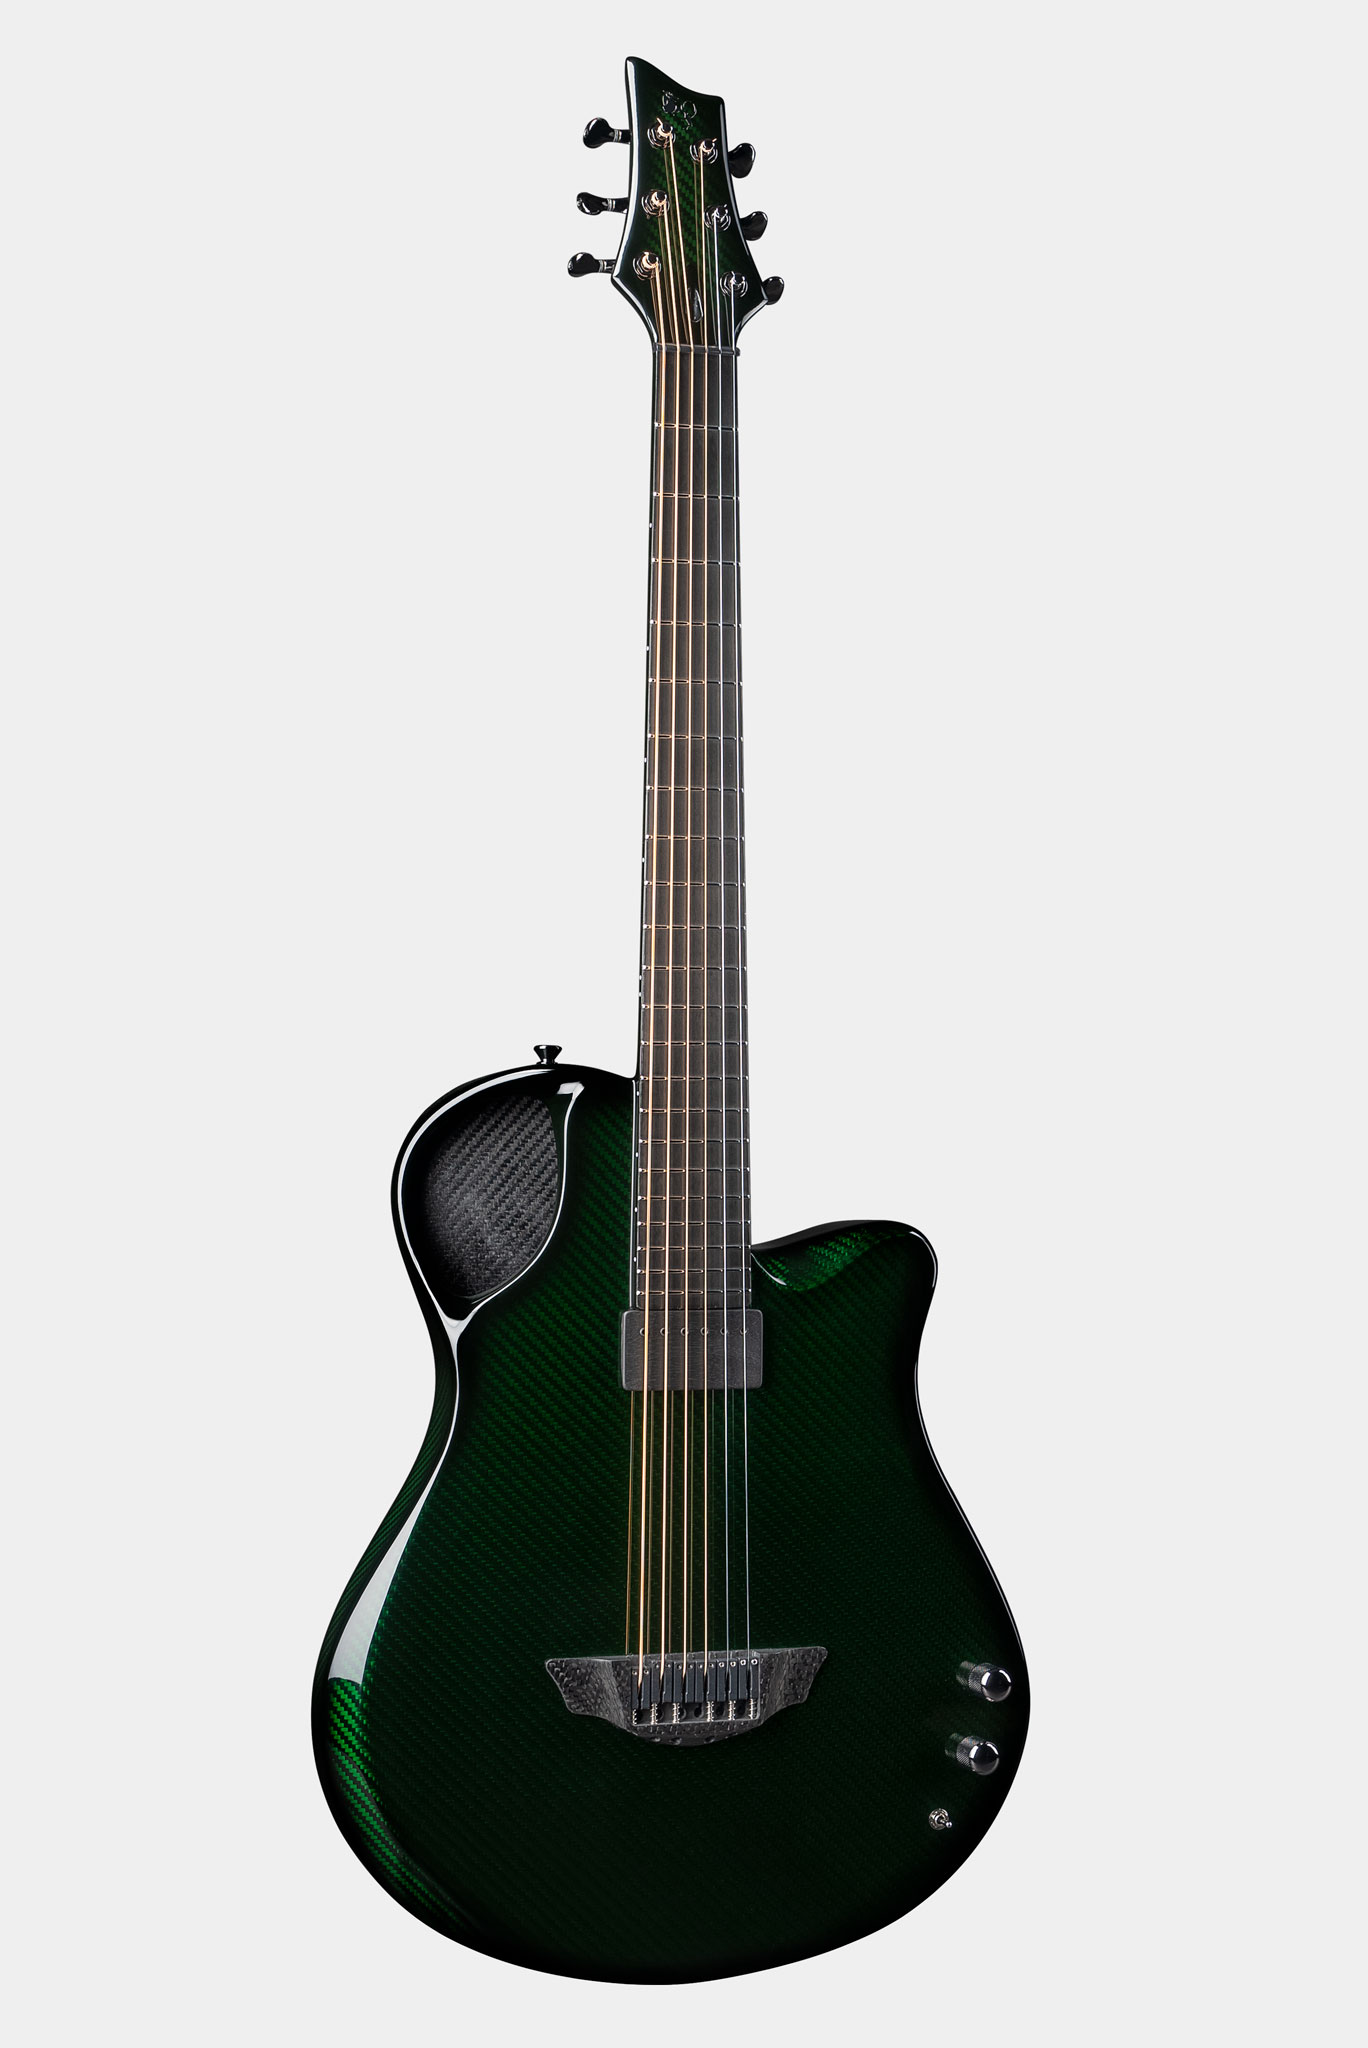 X10 Slimline Green with Ghost Pickup